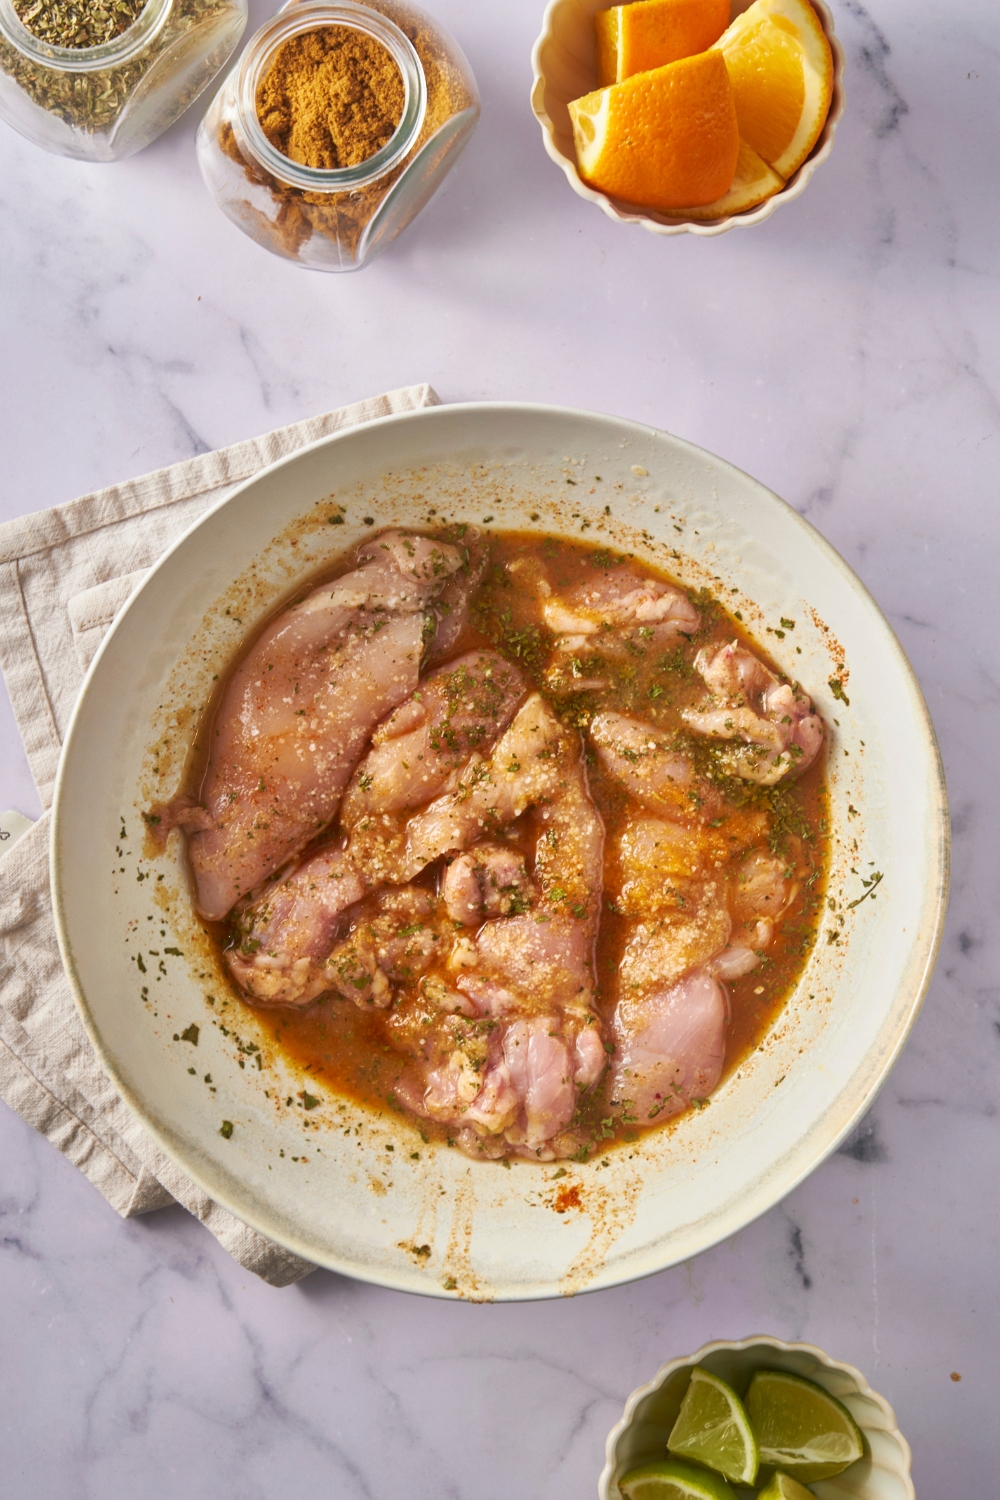 A large mixing bowl filled with raw chicken in a citrus marinade.